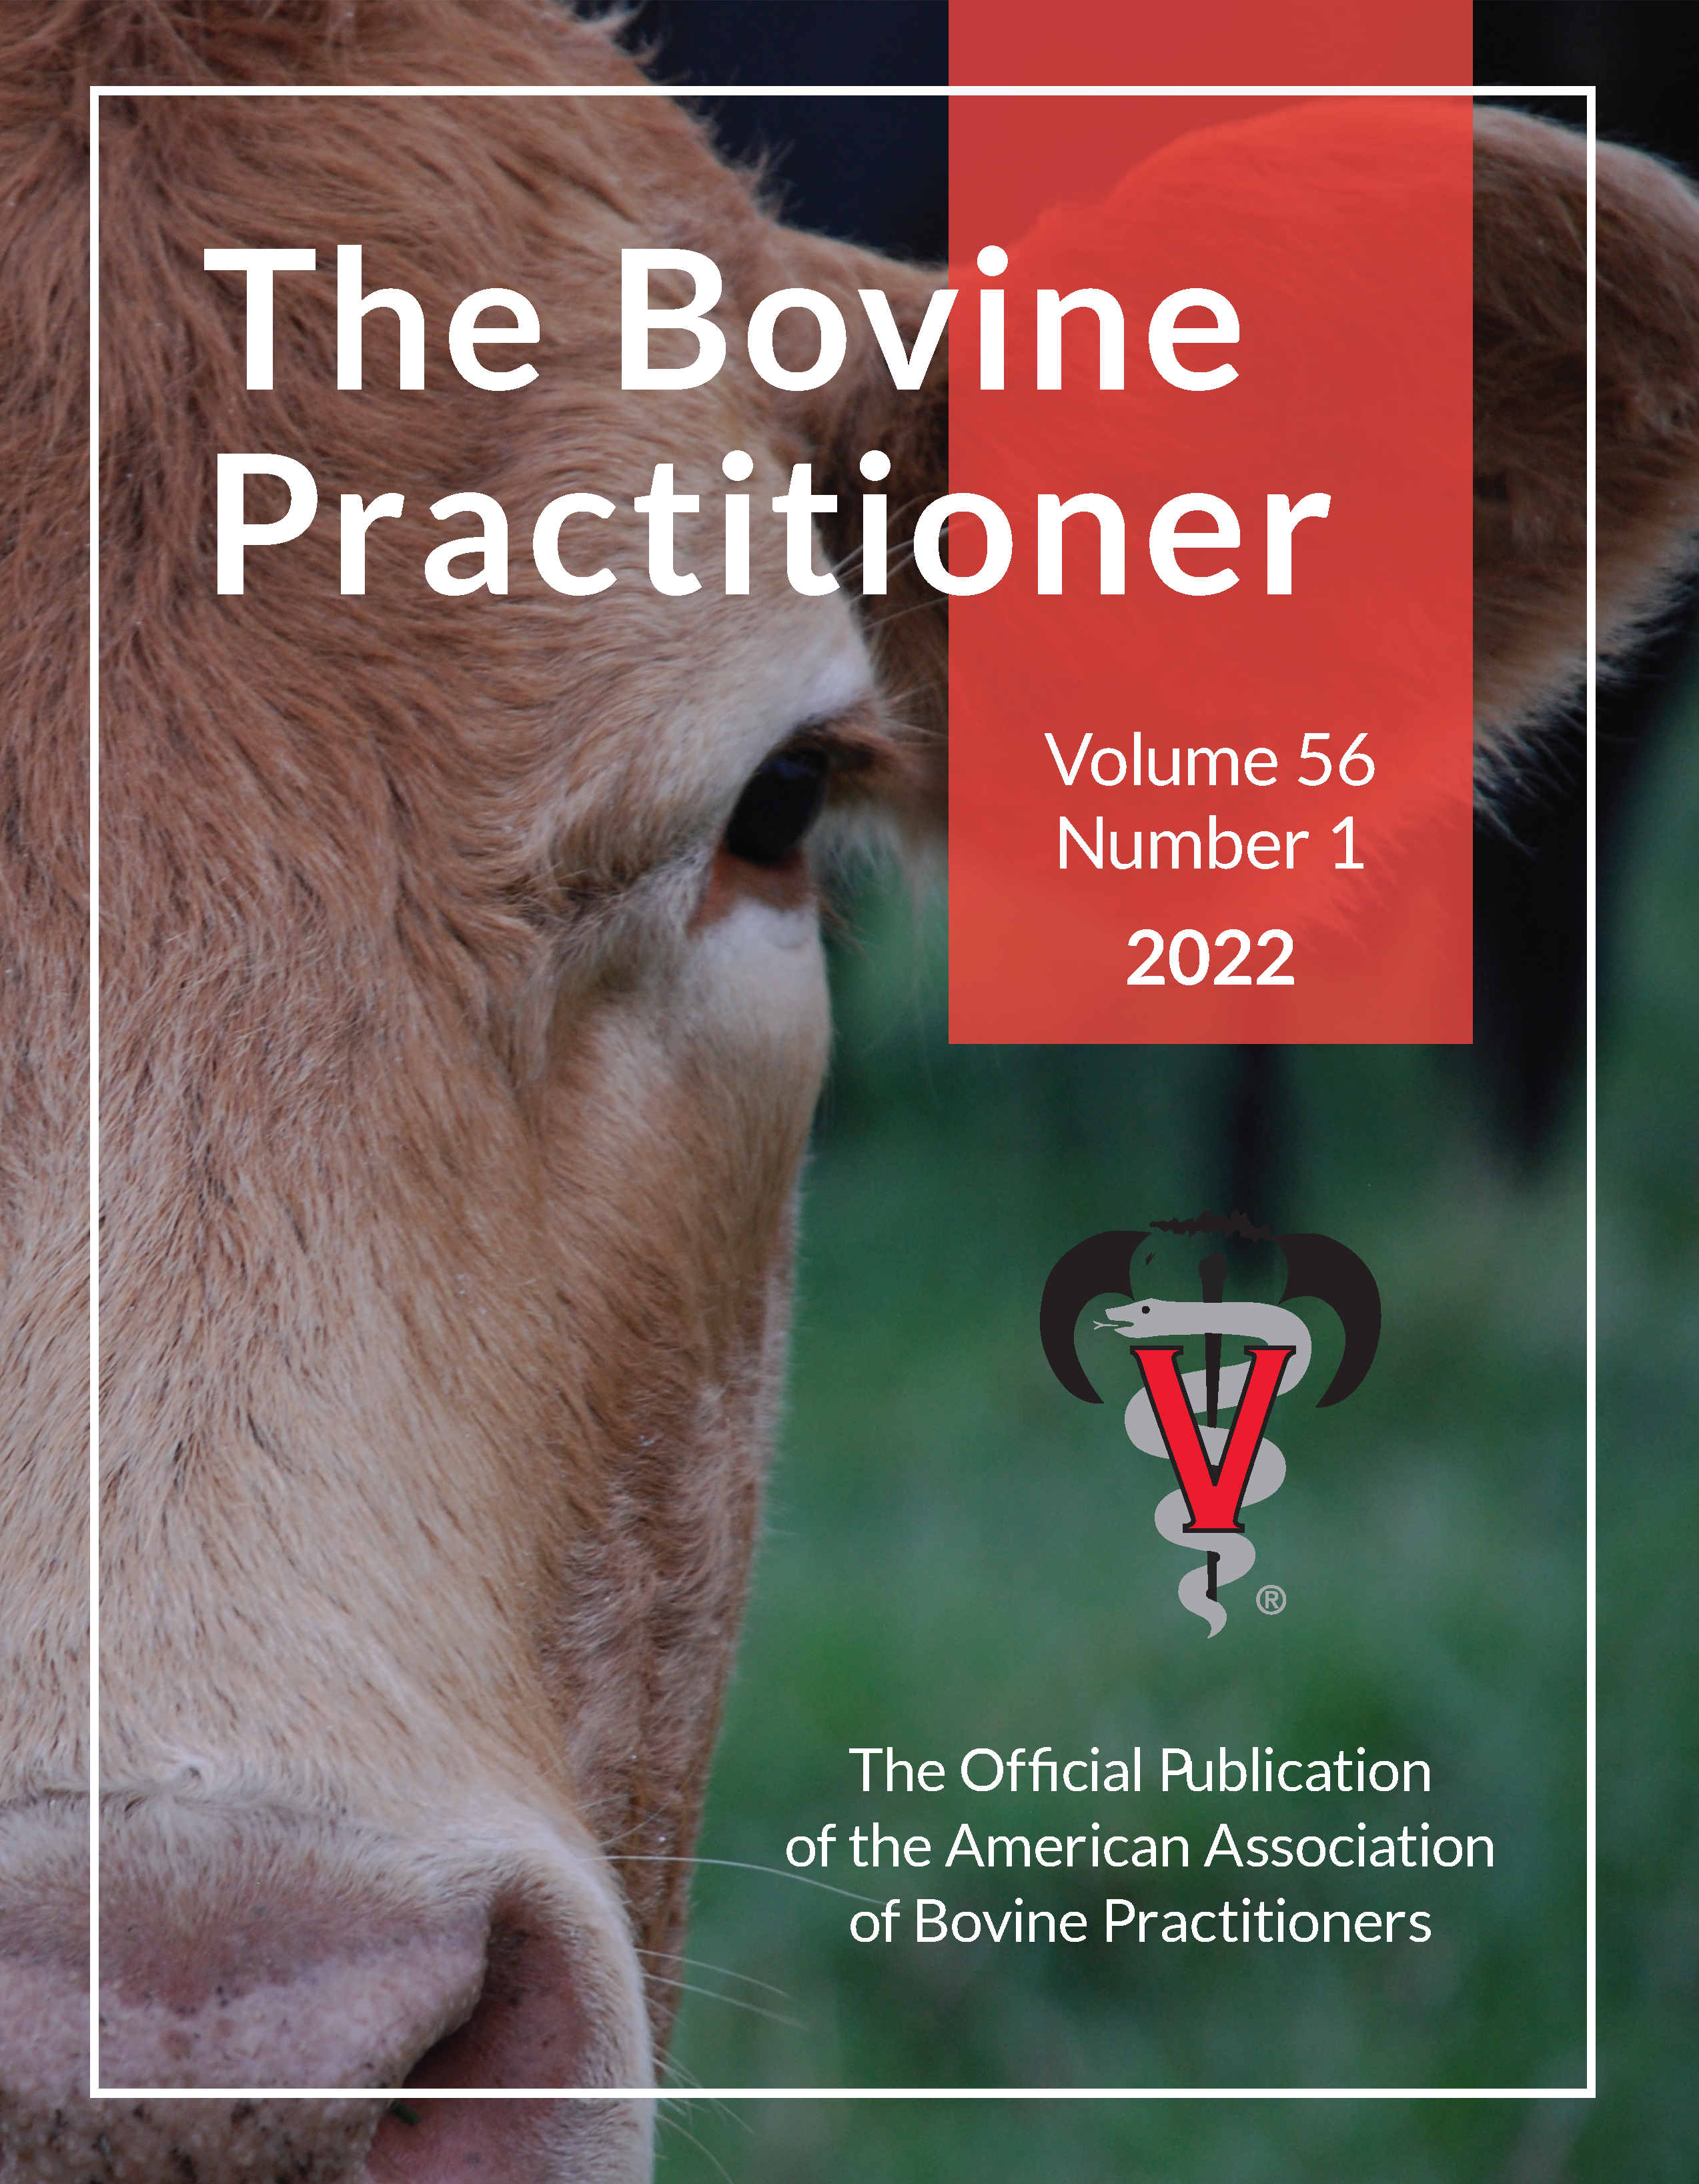 Cover image of 56th Volume, No. 1 of The Bovine Practitioner